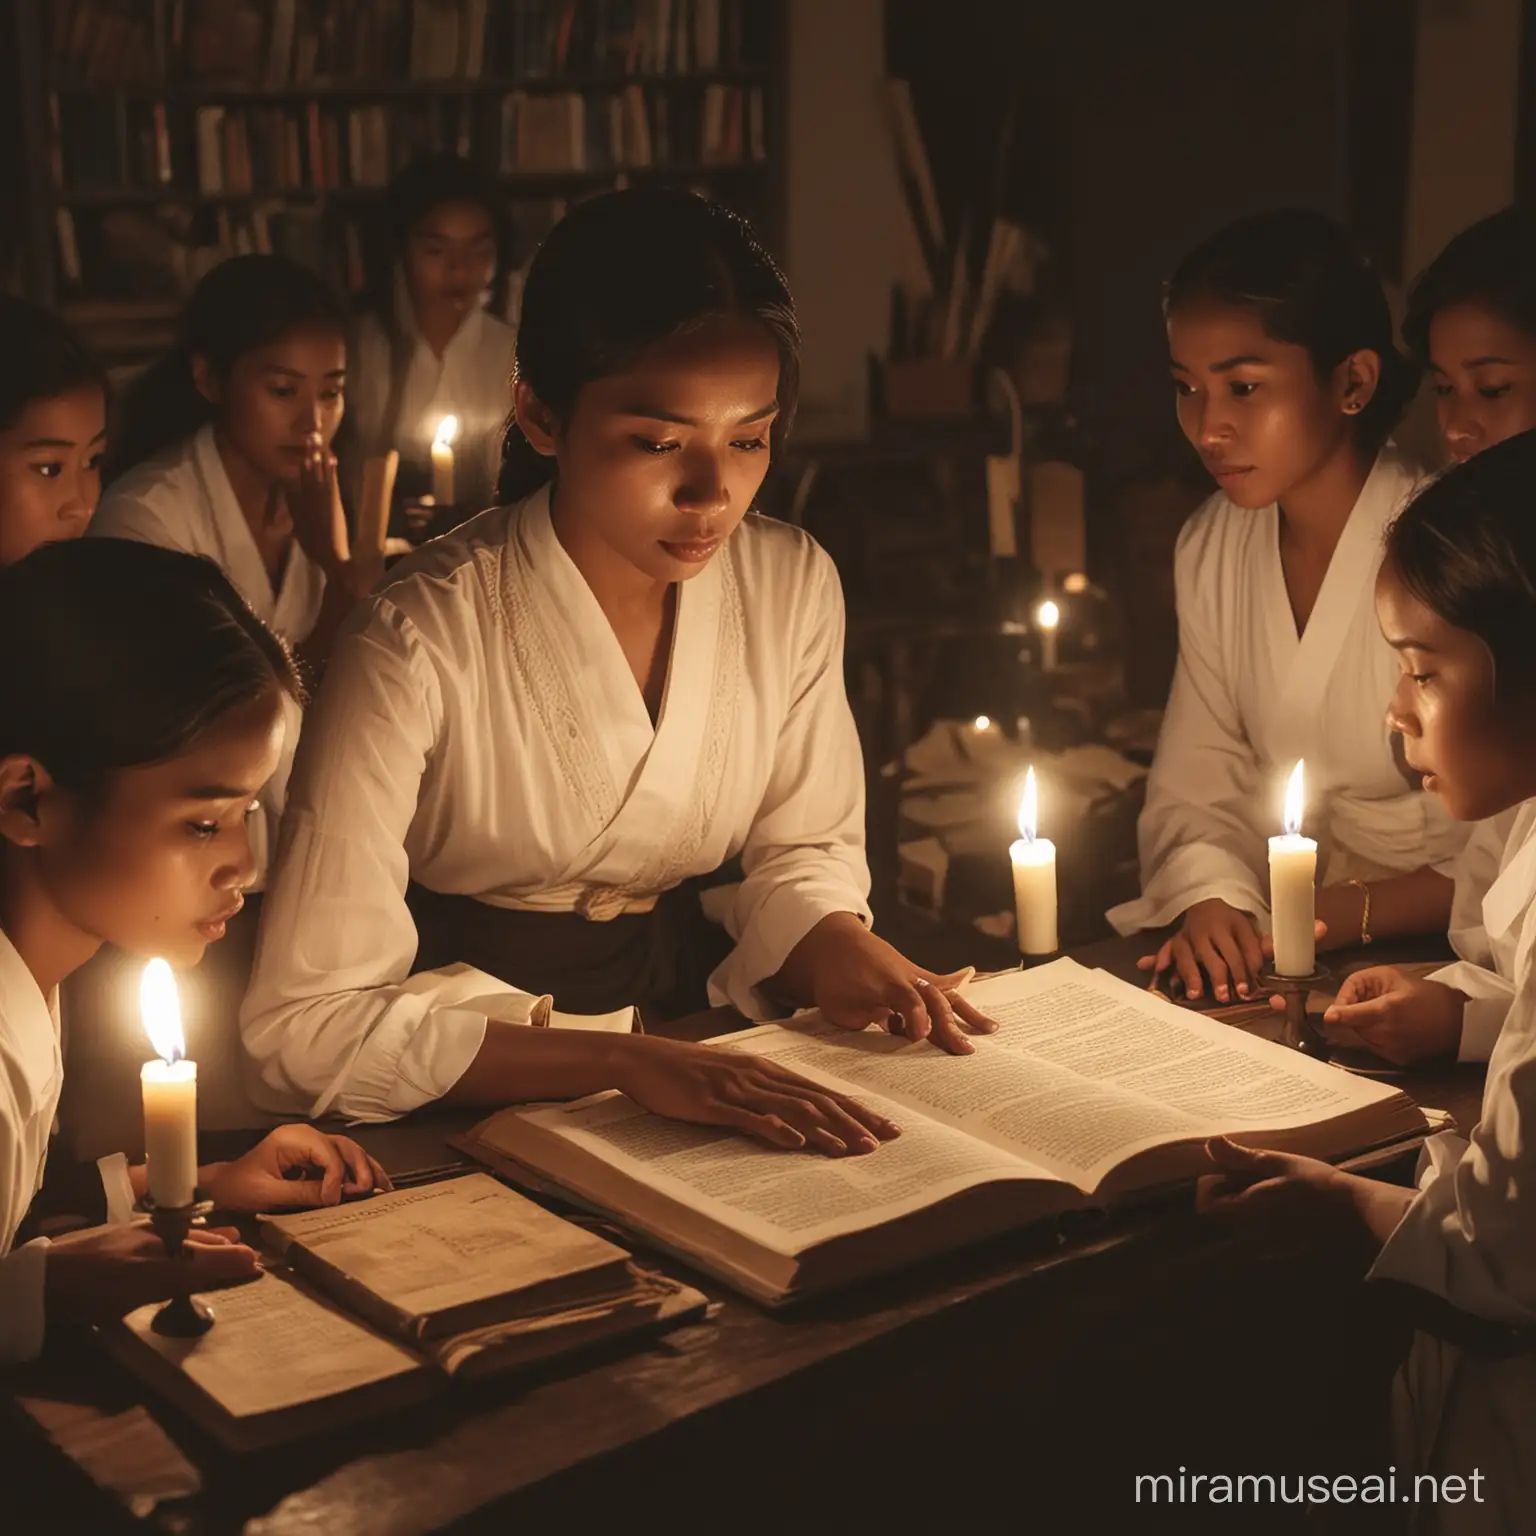 A young Javanese girl, determined and passionate, secretly teaching a group of women and girls under candlelight, surrounded by books and learning materials, symbolizing the fight for women's rights and education in colonial times.